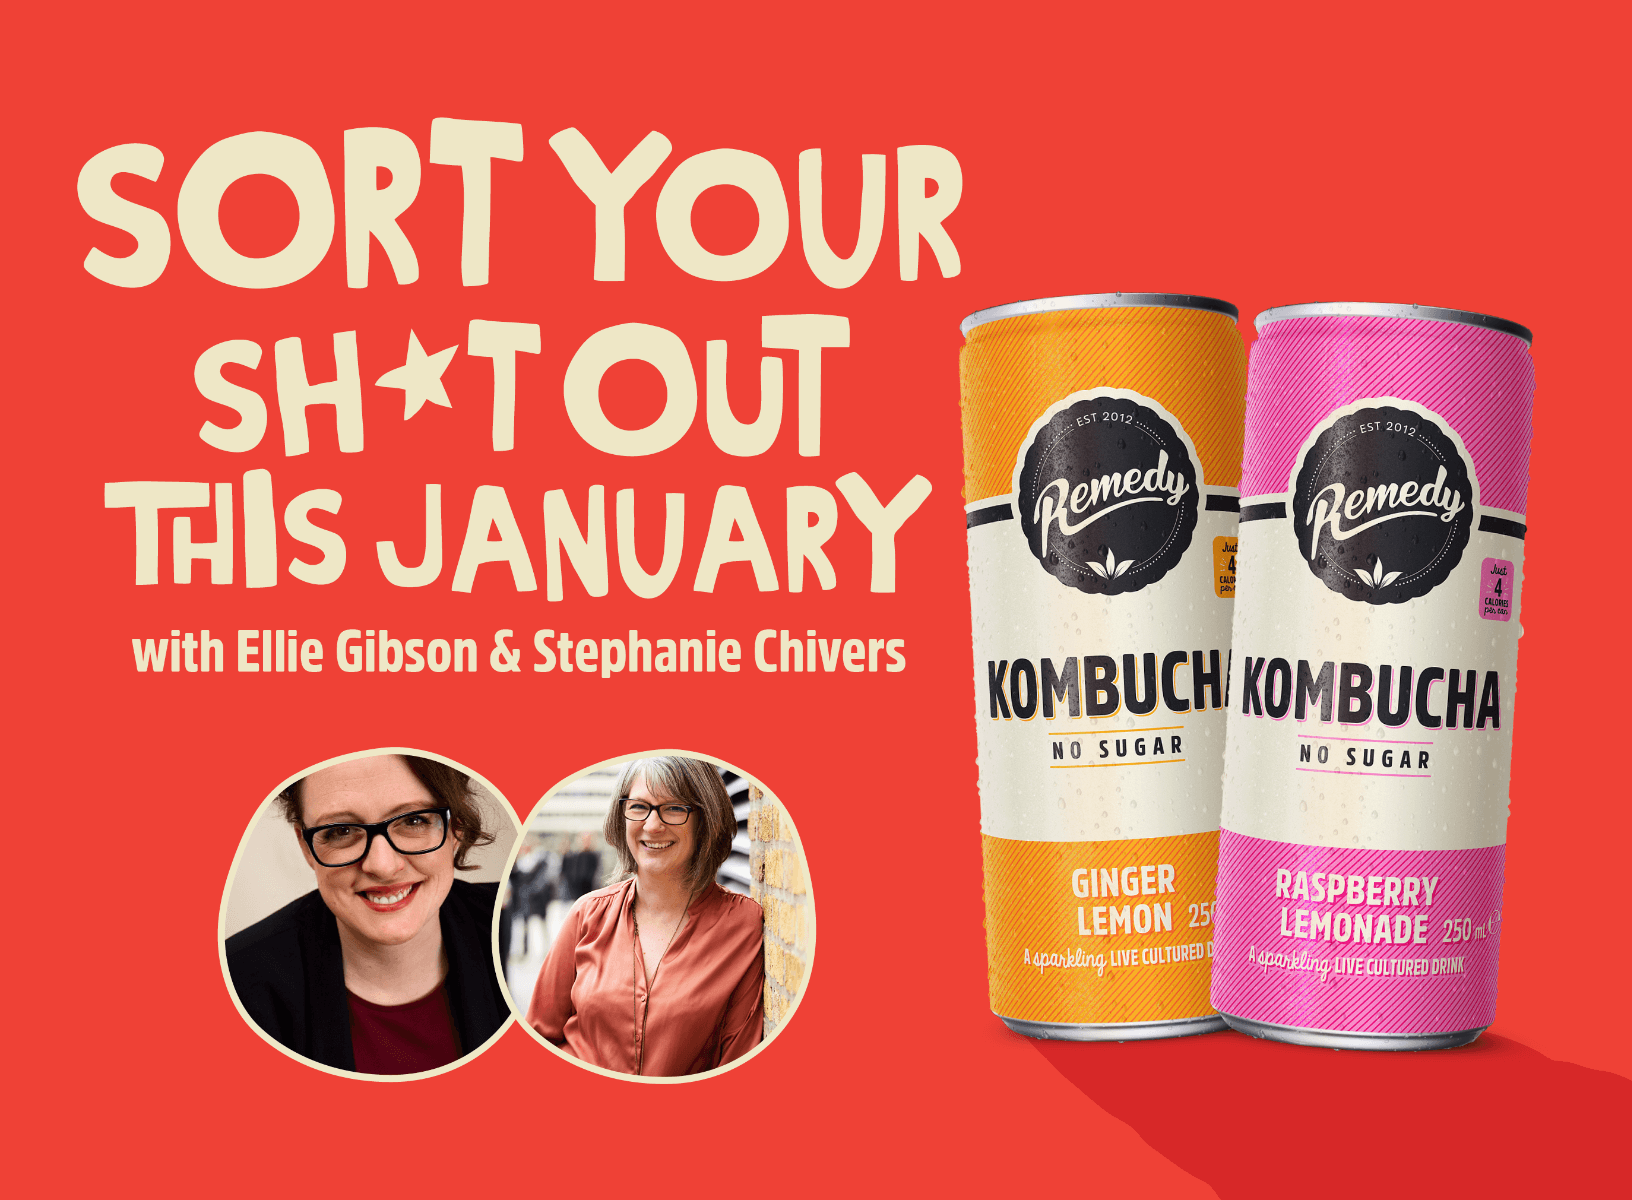 Sort Your Sh*t out this January